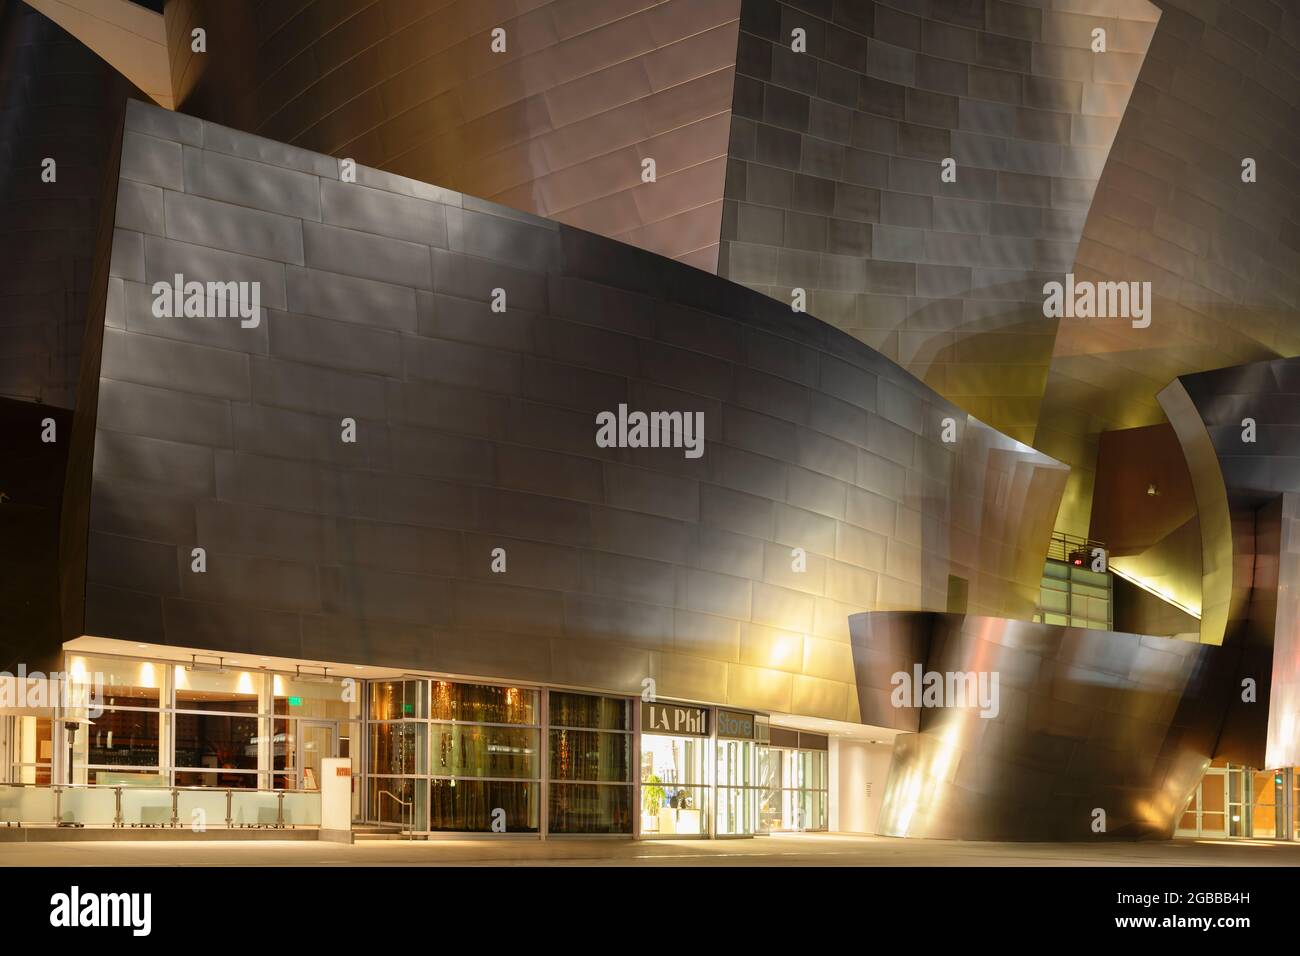 Walt Disney Concert Hall, Architect Frank Gehry, Los Angeles, California, United States of America, North America Stock Photo